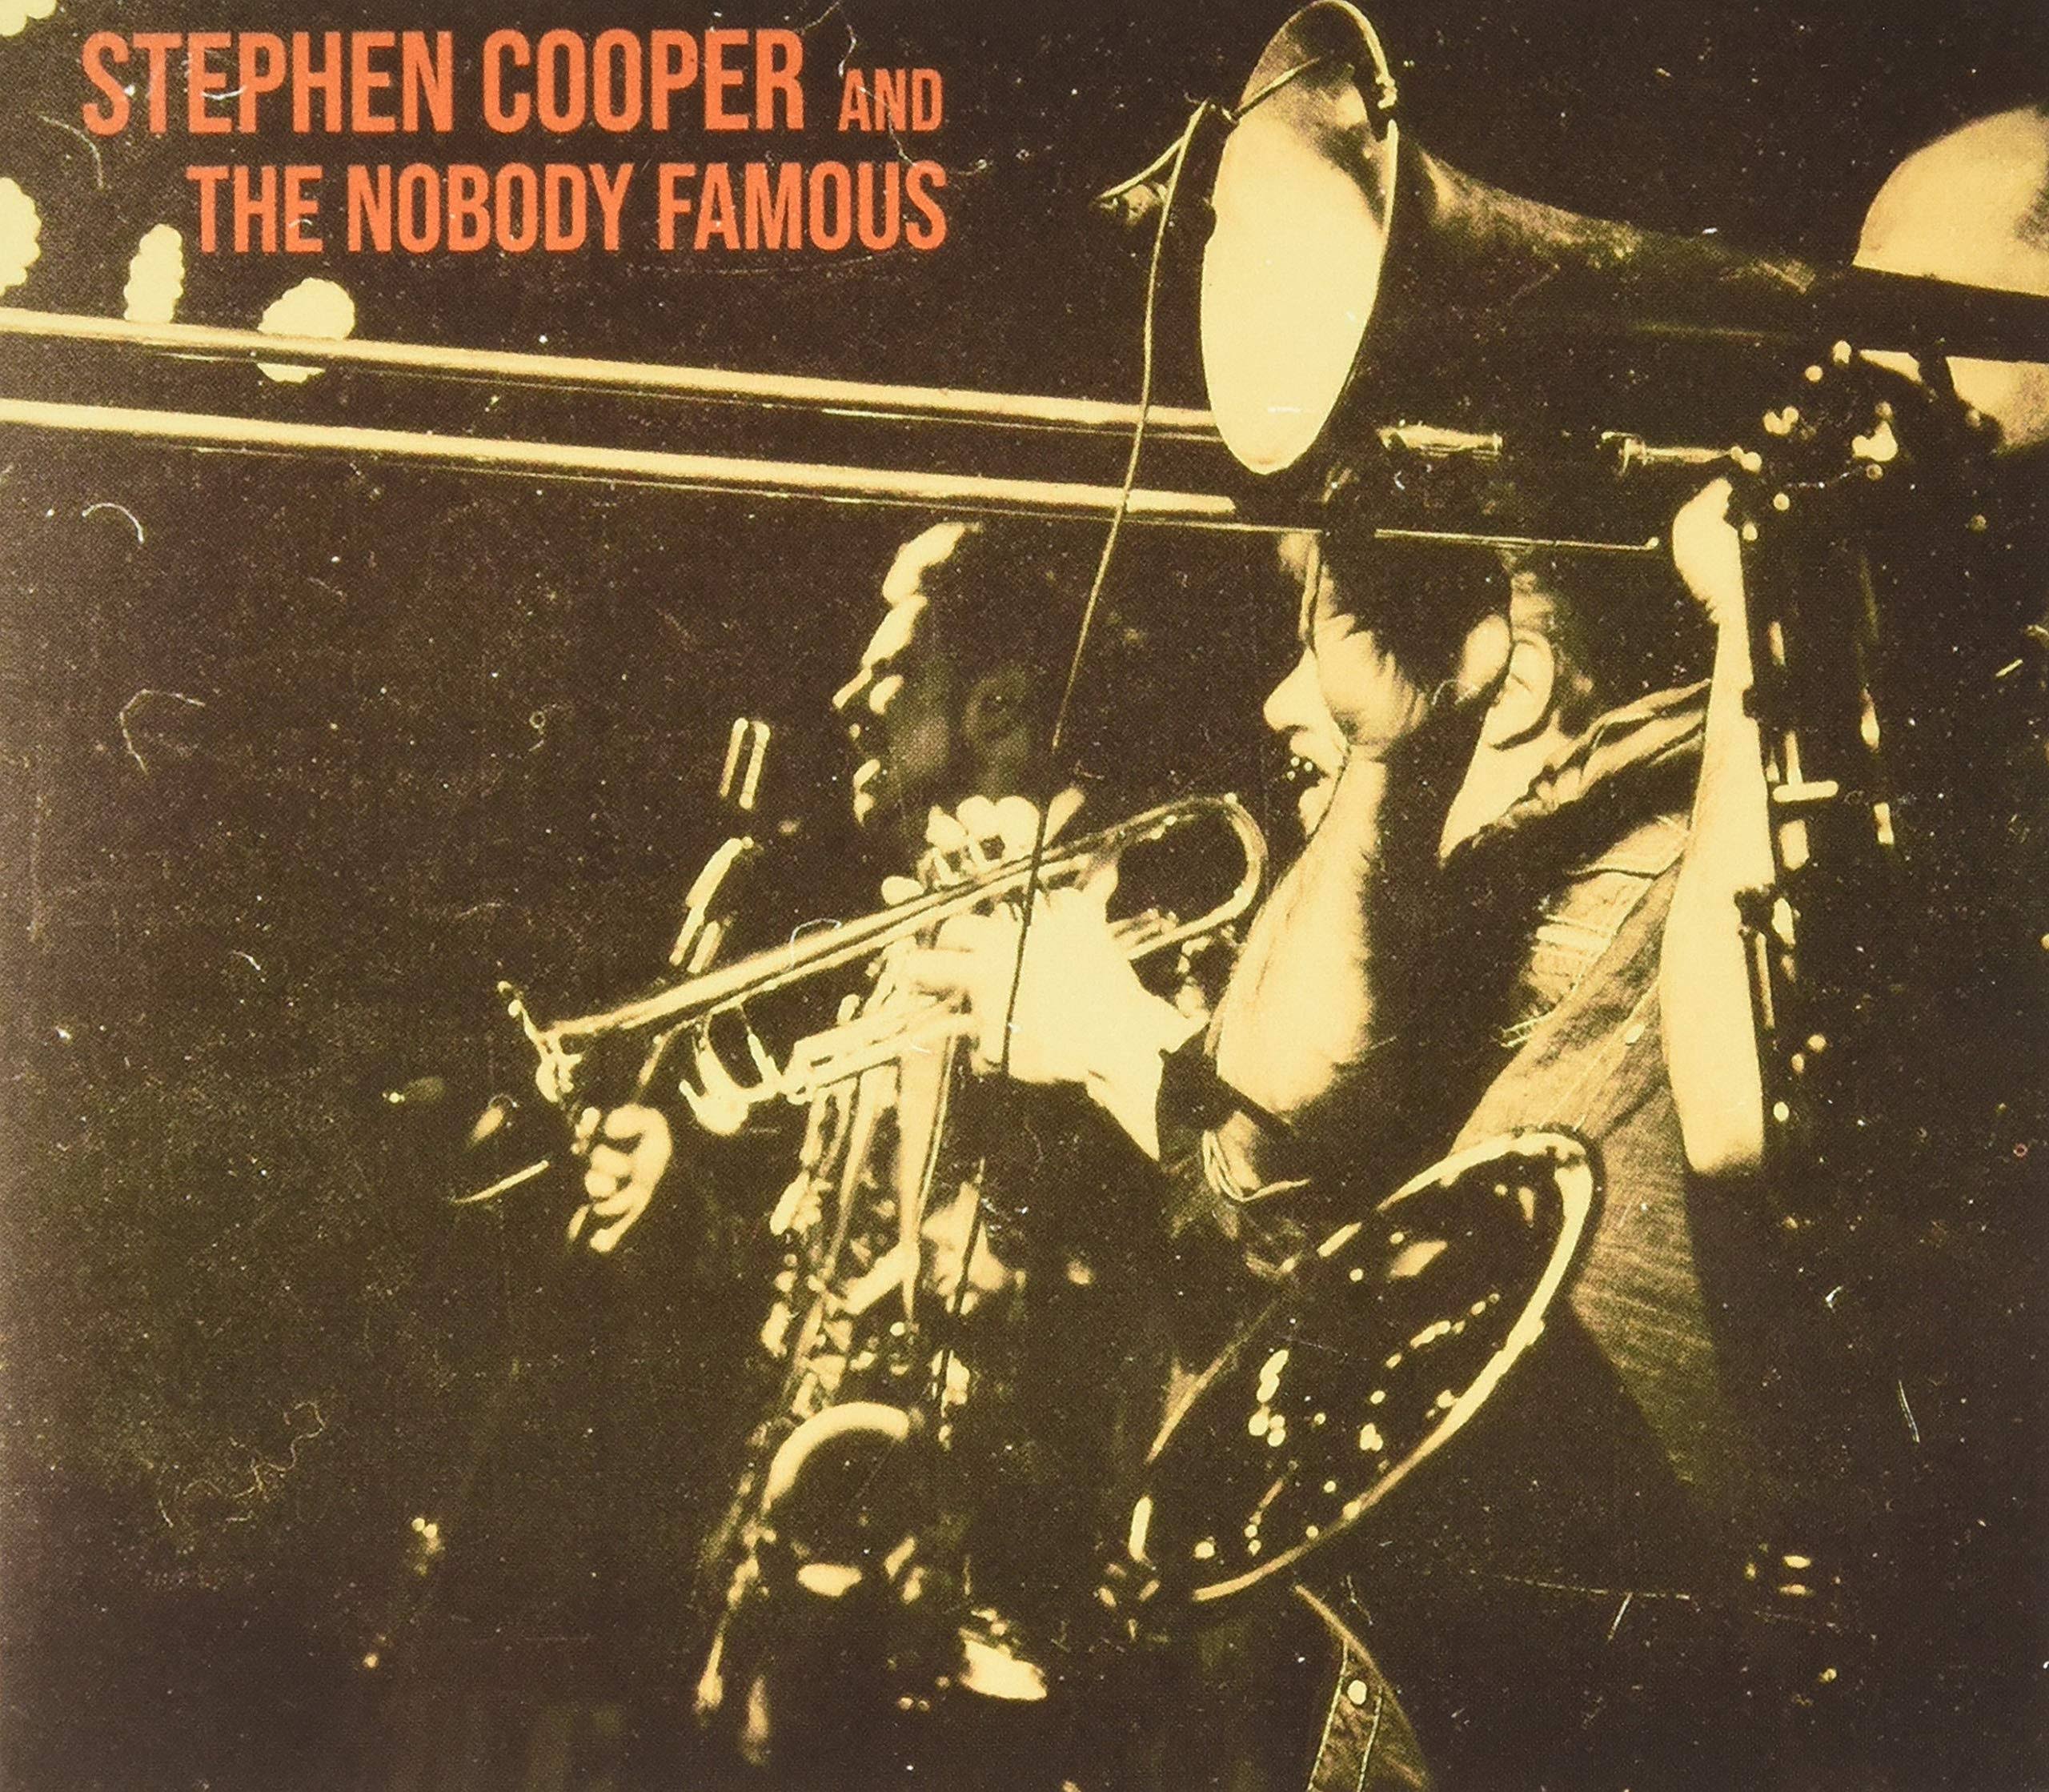 Stephen Cooper and The Nobody Famous